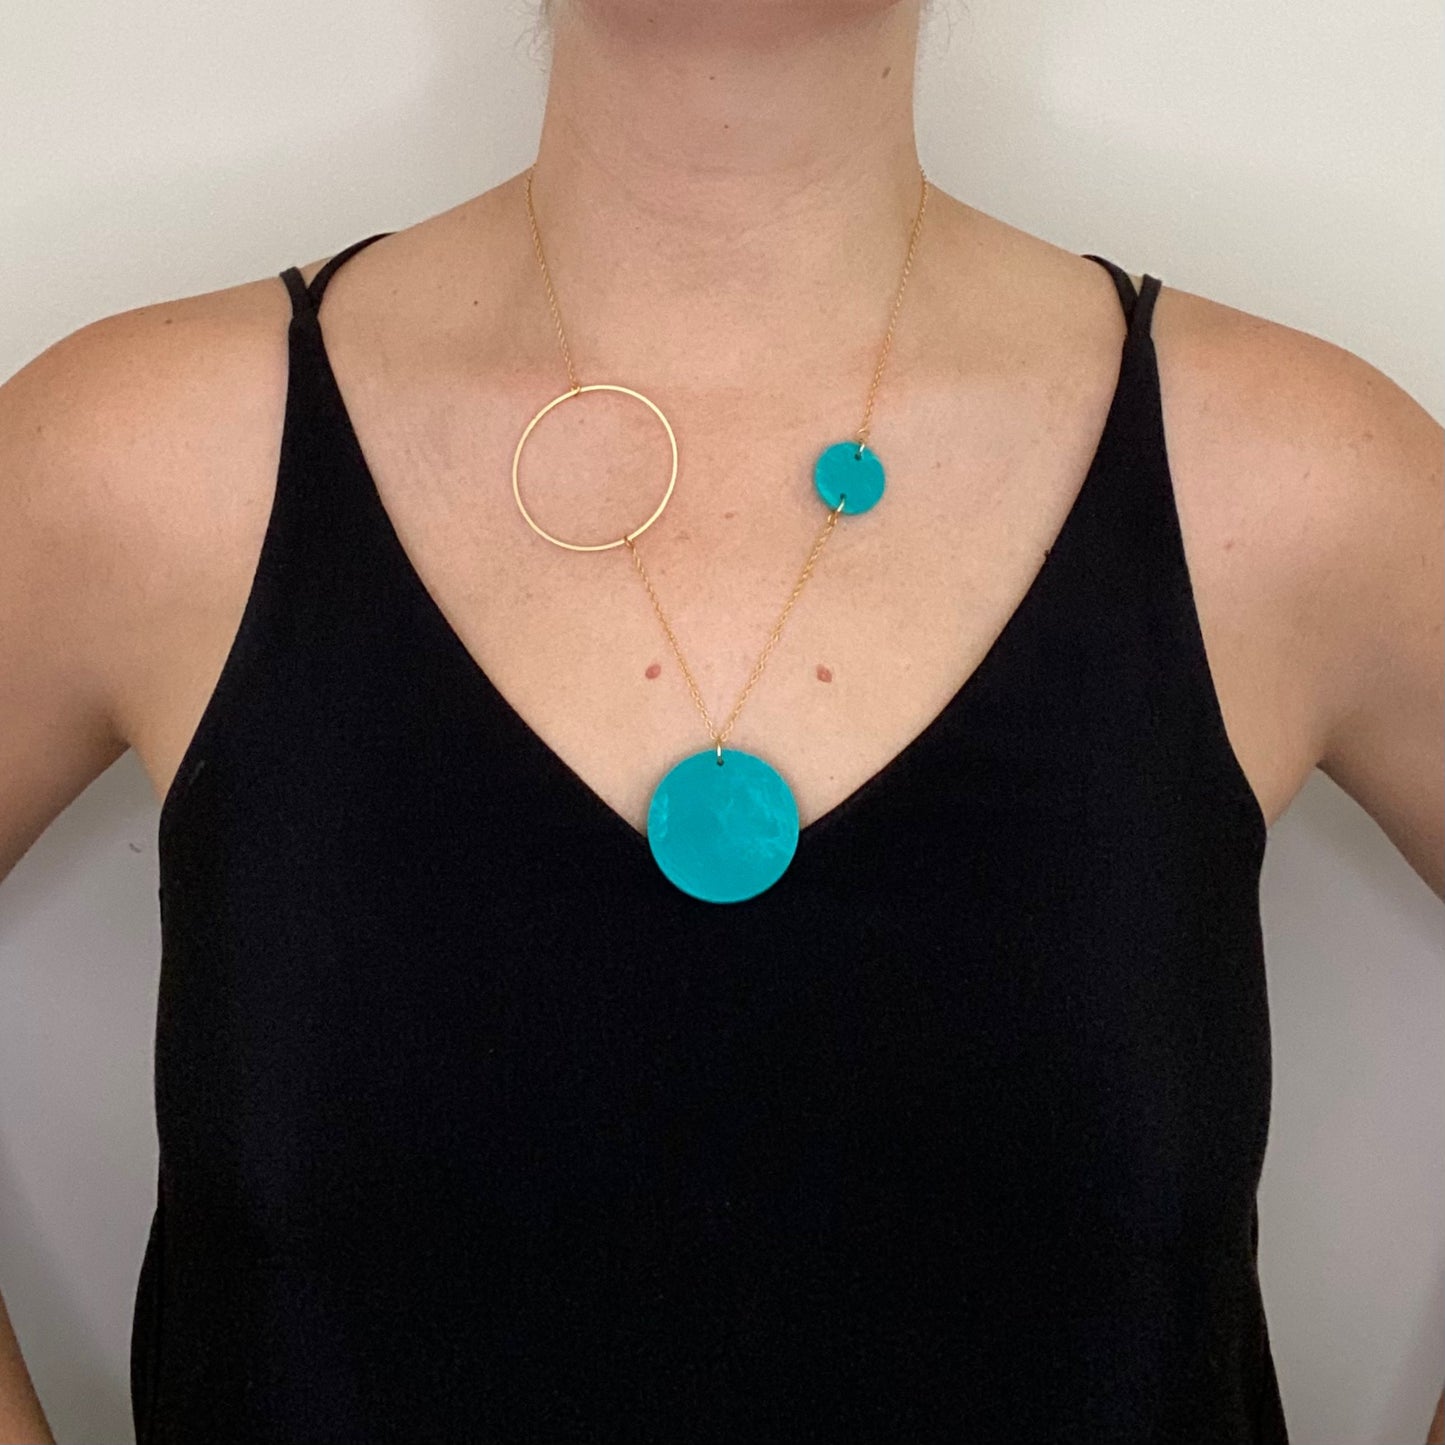 Constellation Necklace- Teal Green Marble